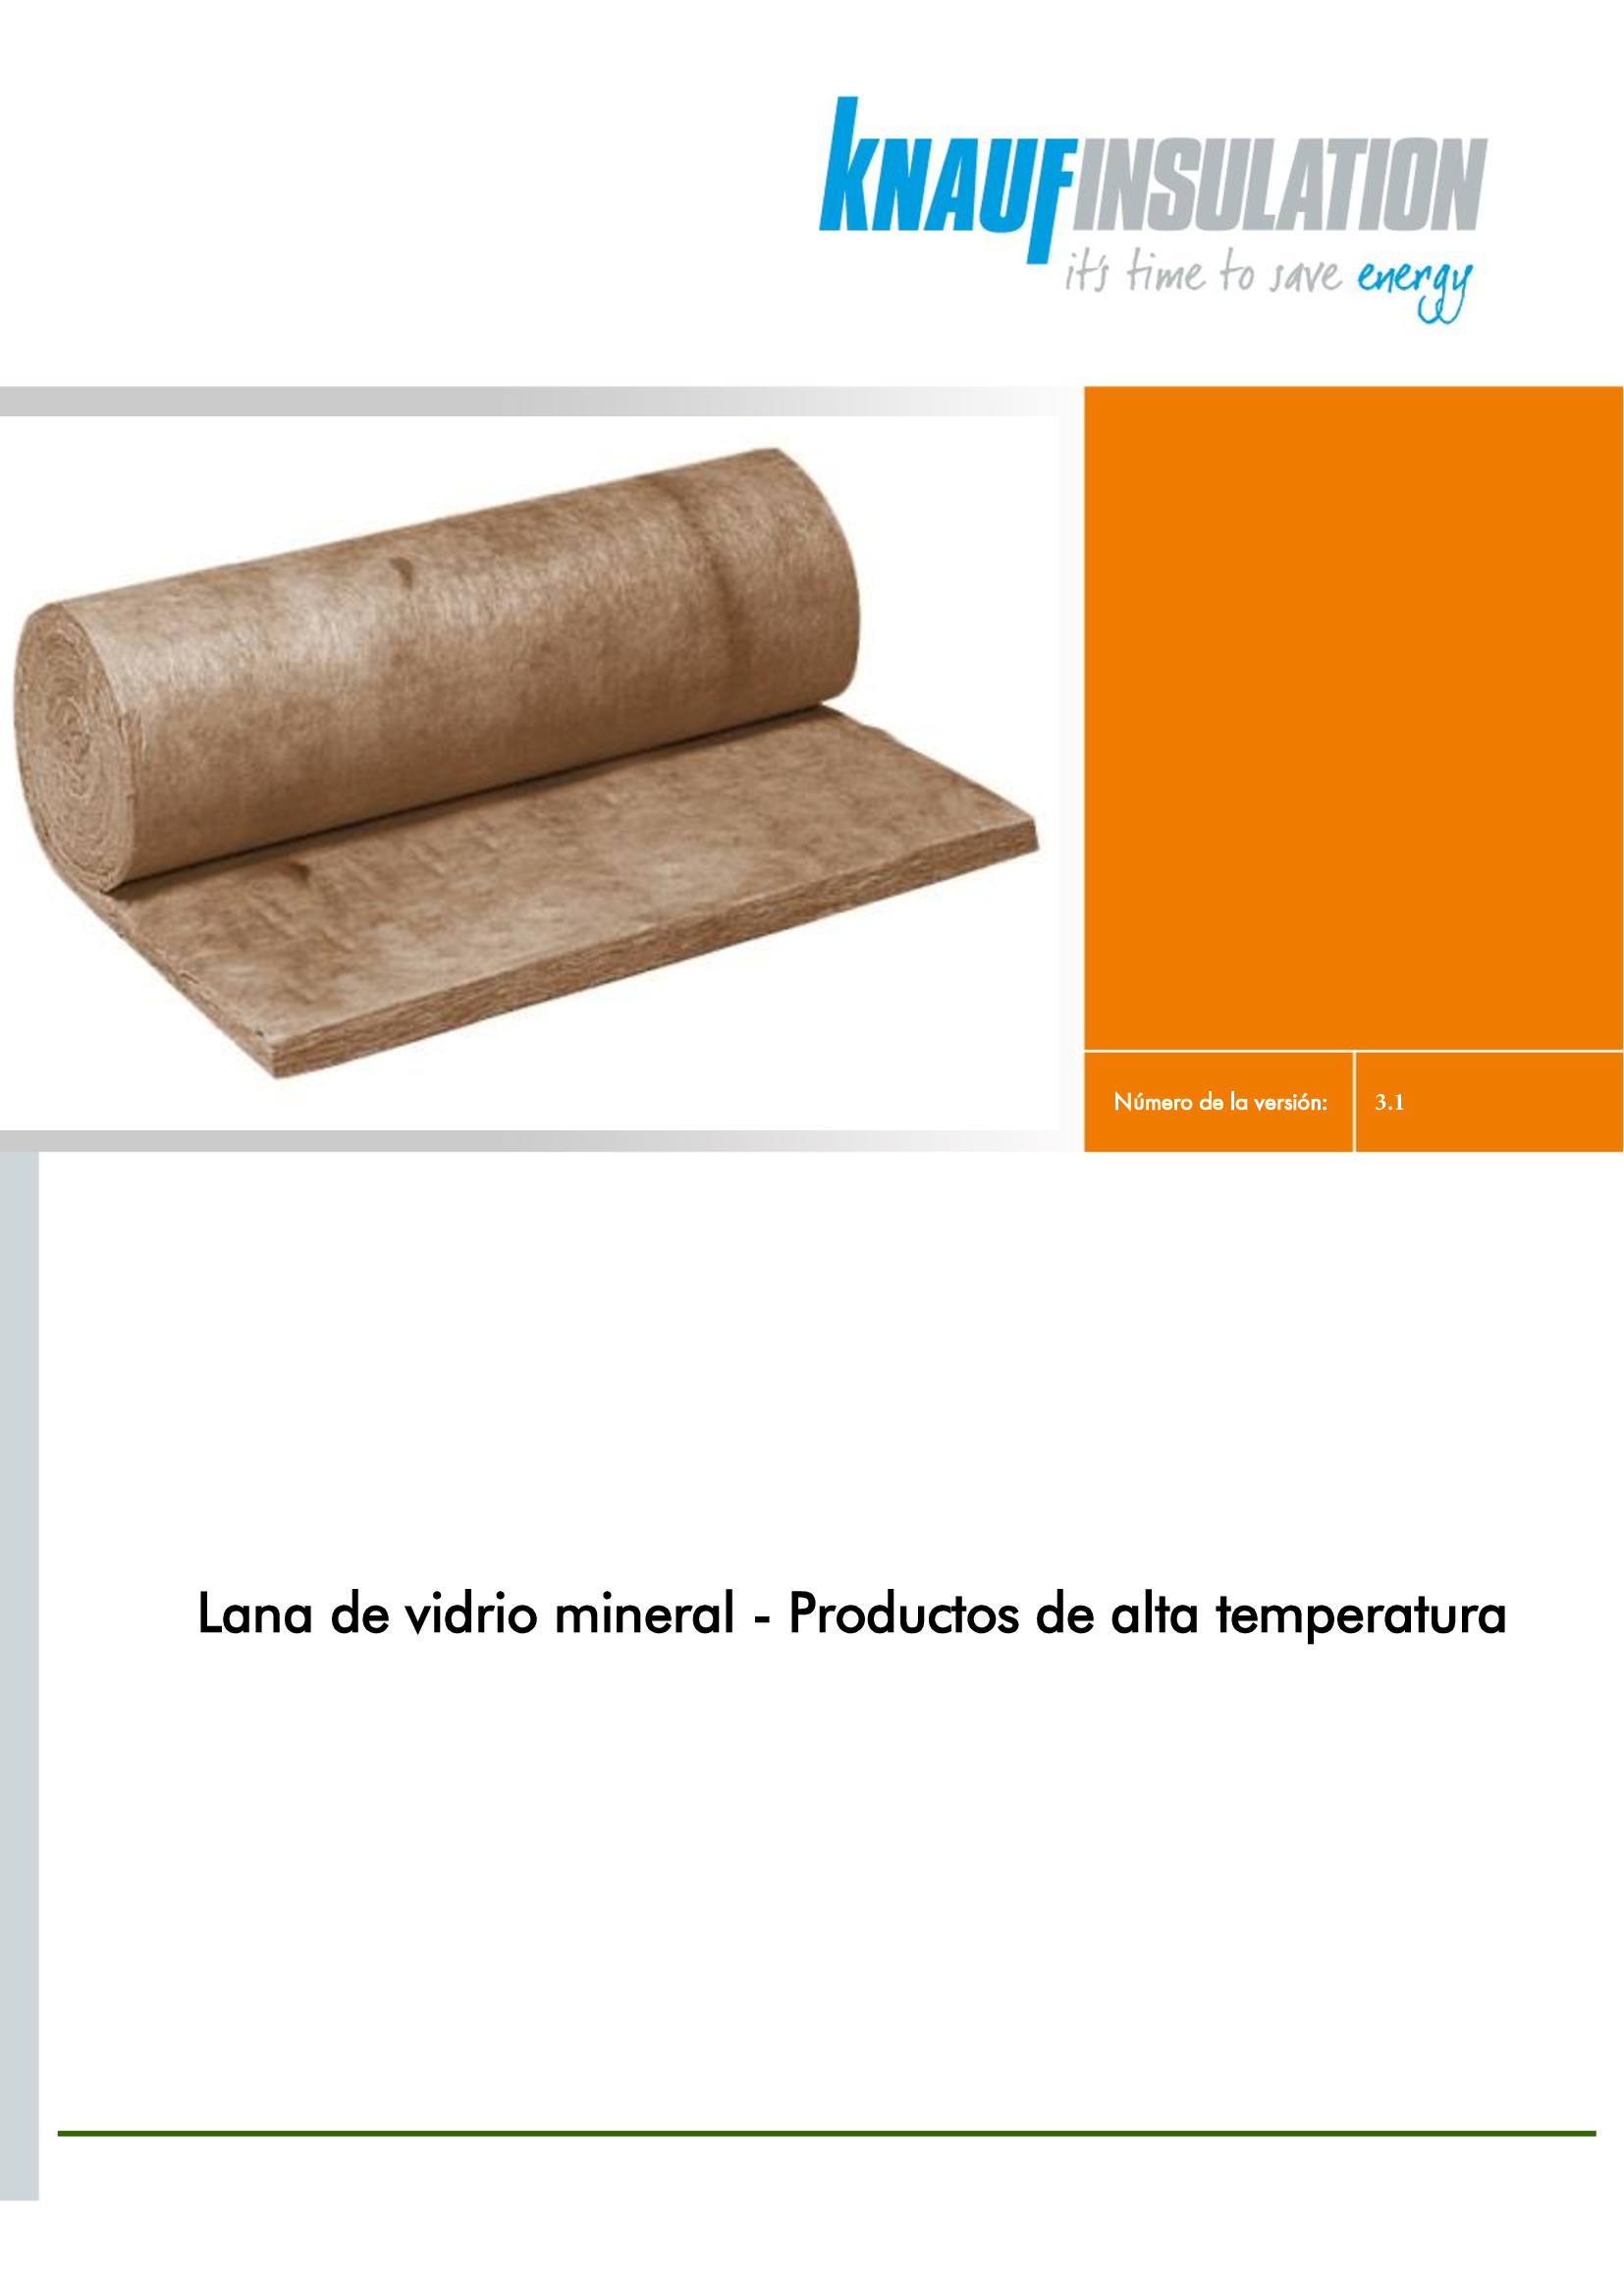 Safety Data Sheet (SDS) – Glass mineral wool / High temperature products with ECOSE Technology